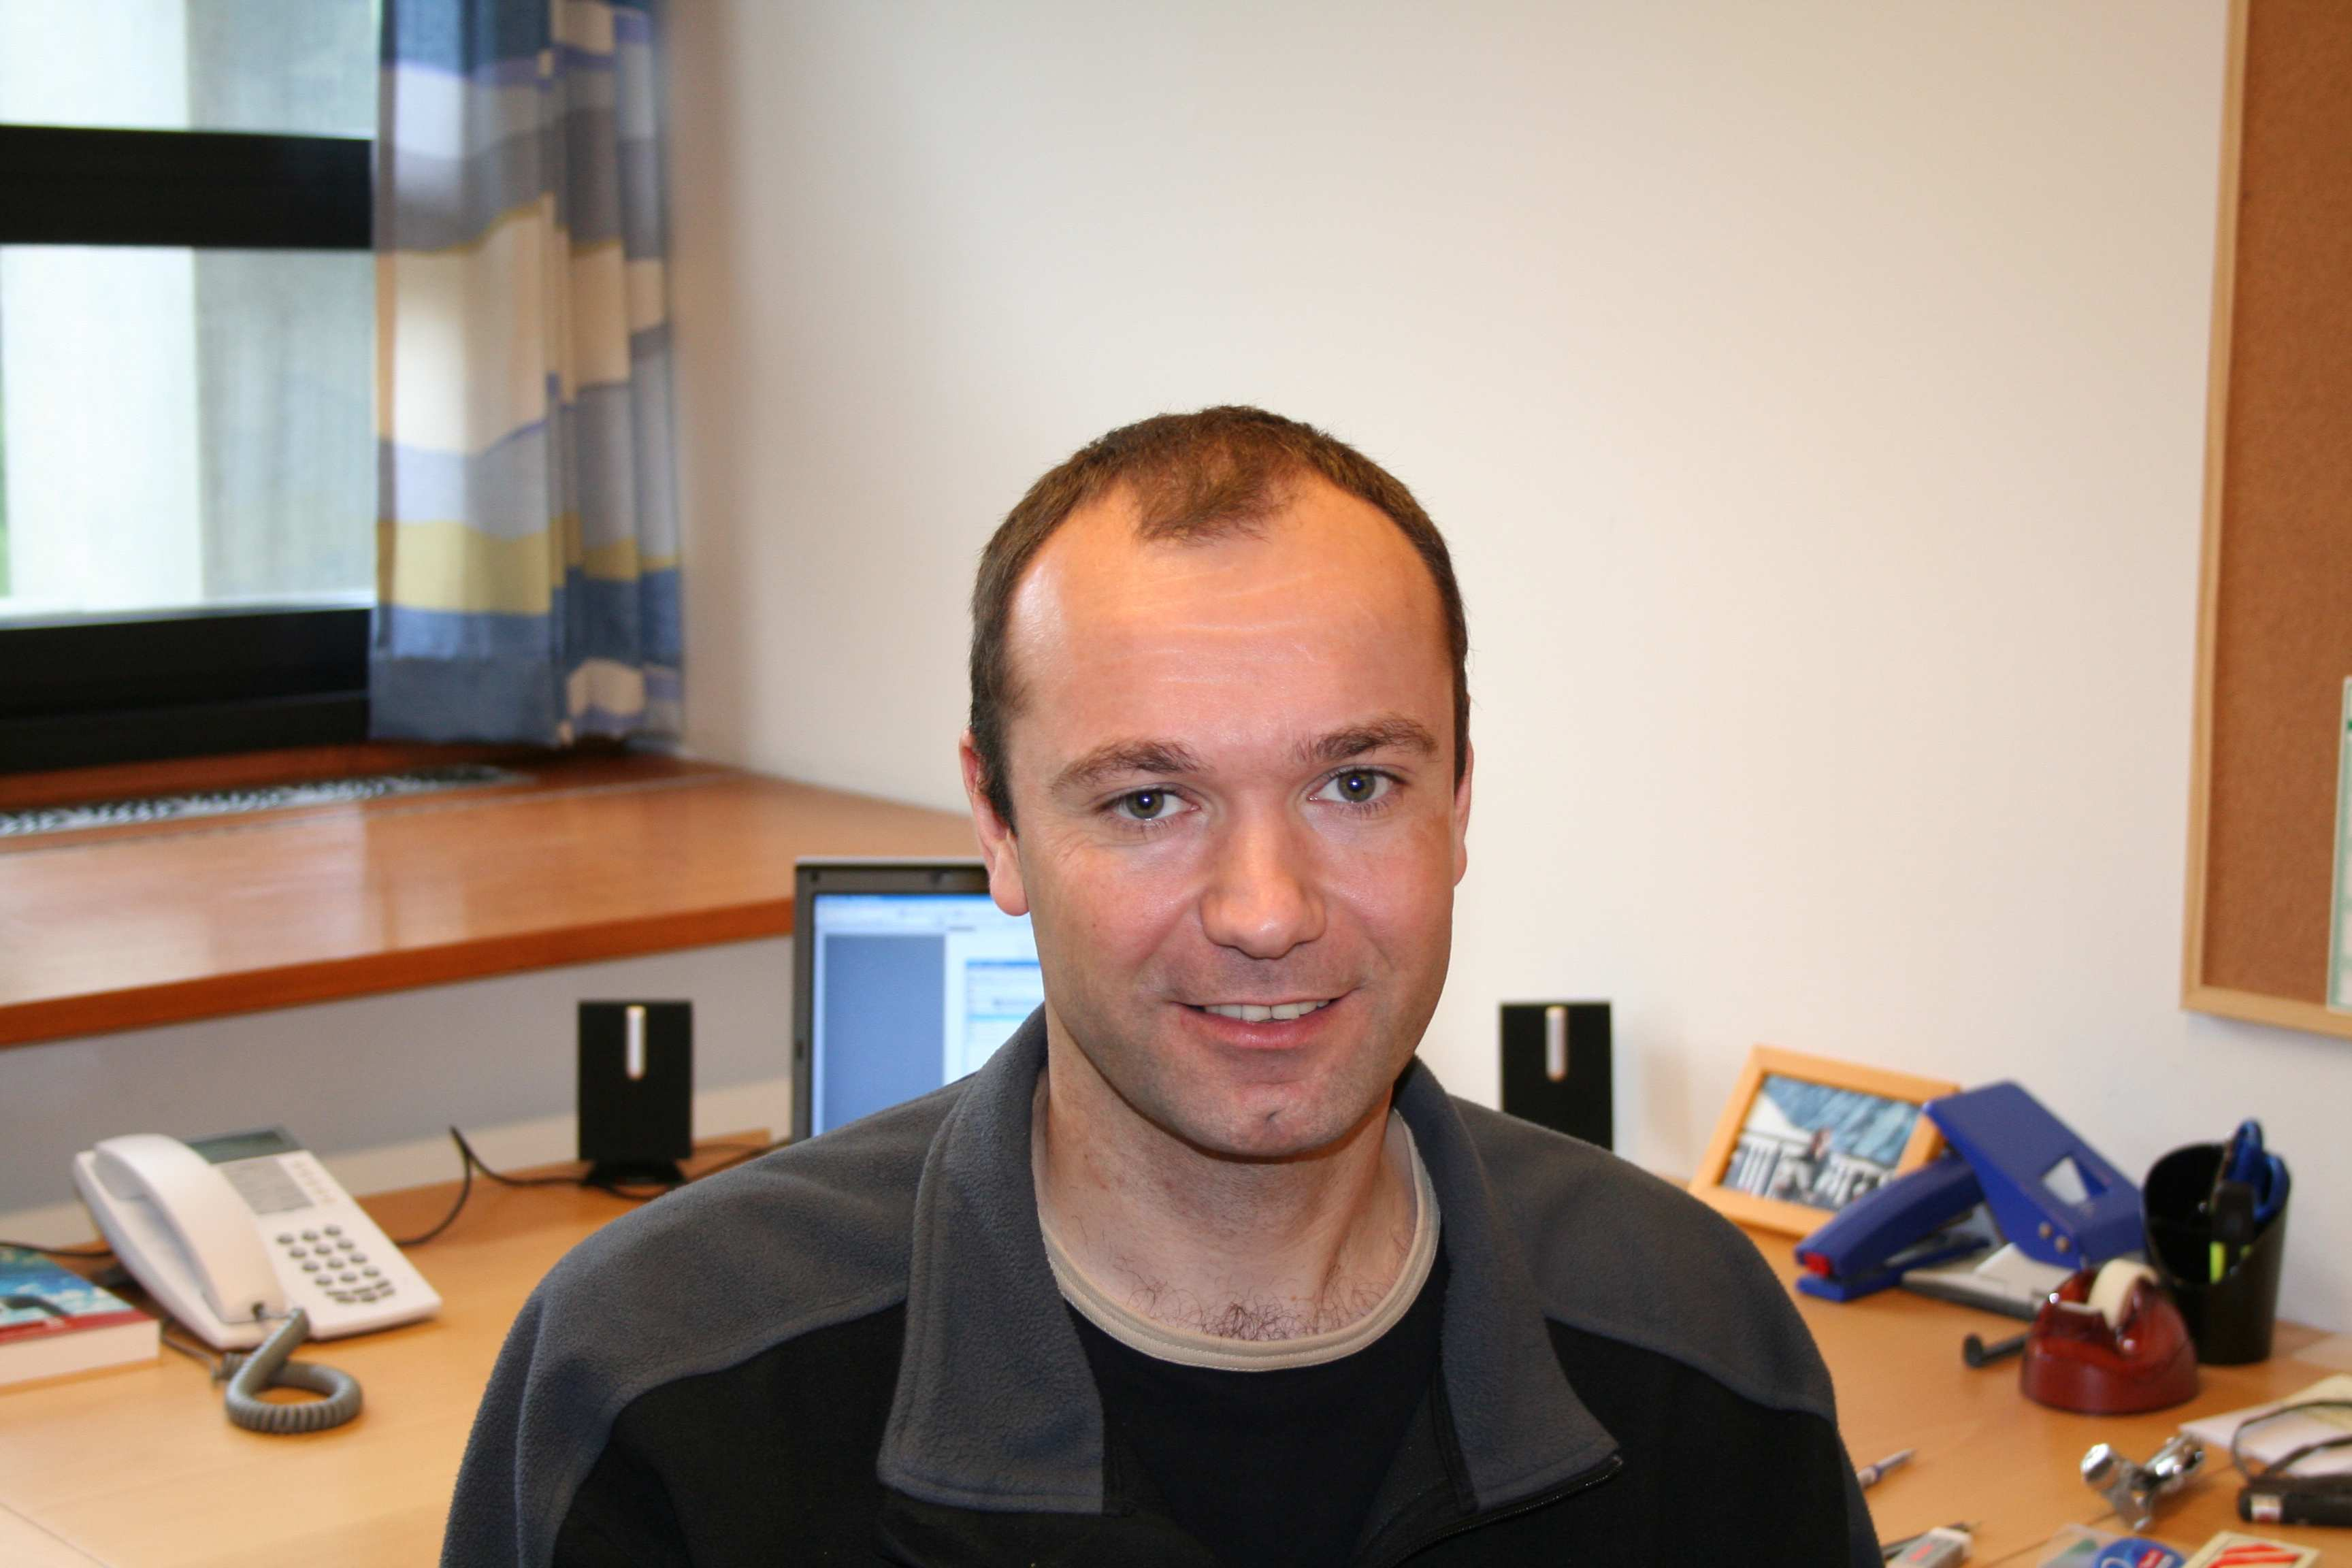 Ronny Schönberg has been employed as a researcher by the Centre for Geobiology/GEO, where he will work on the rise of atmospheric oxygen and the early evolution of life on Earth using various